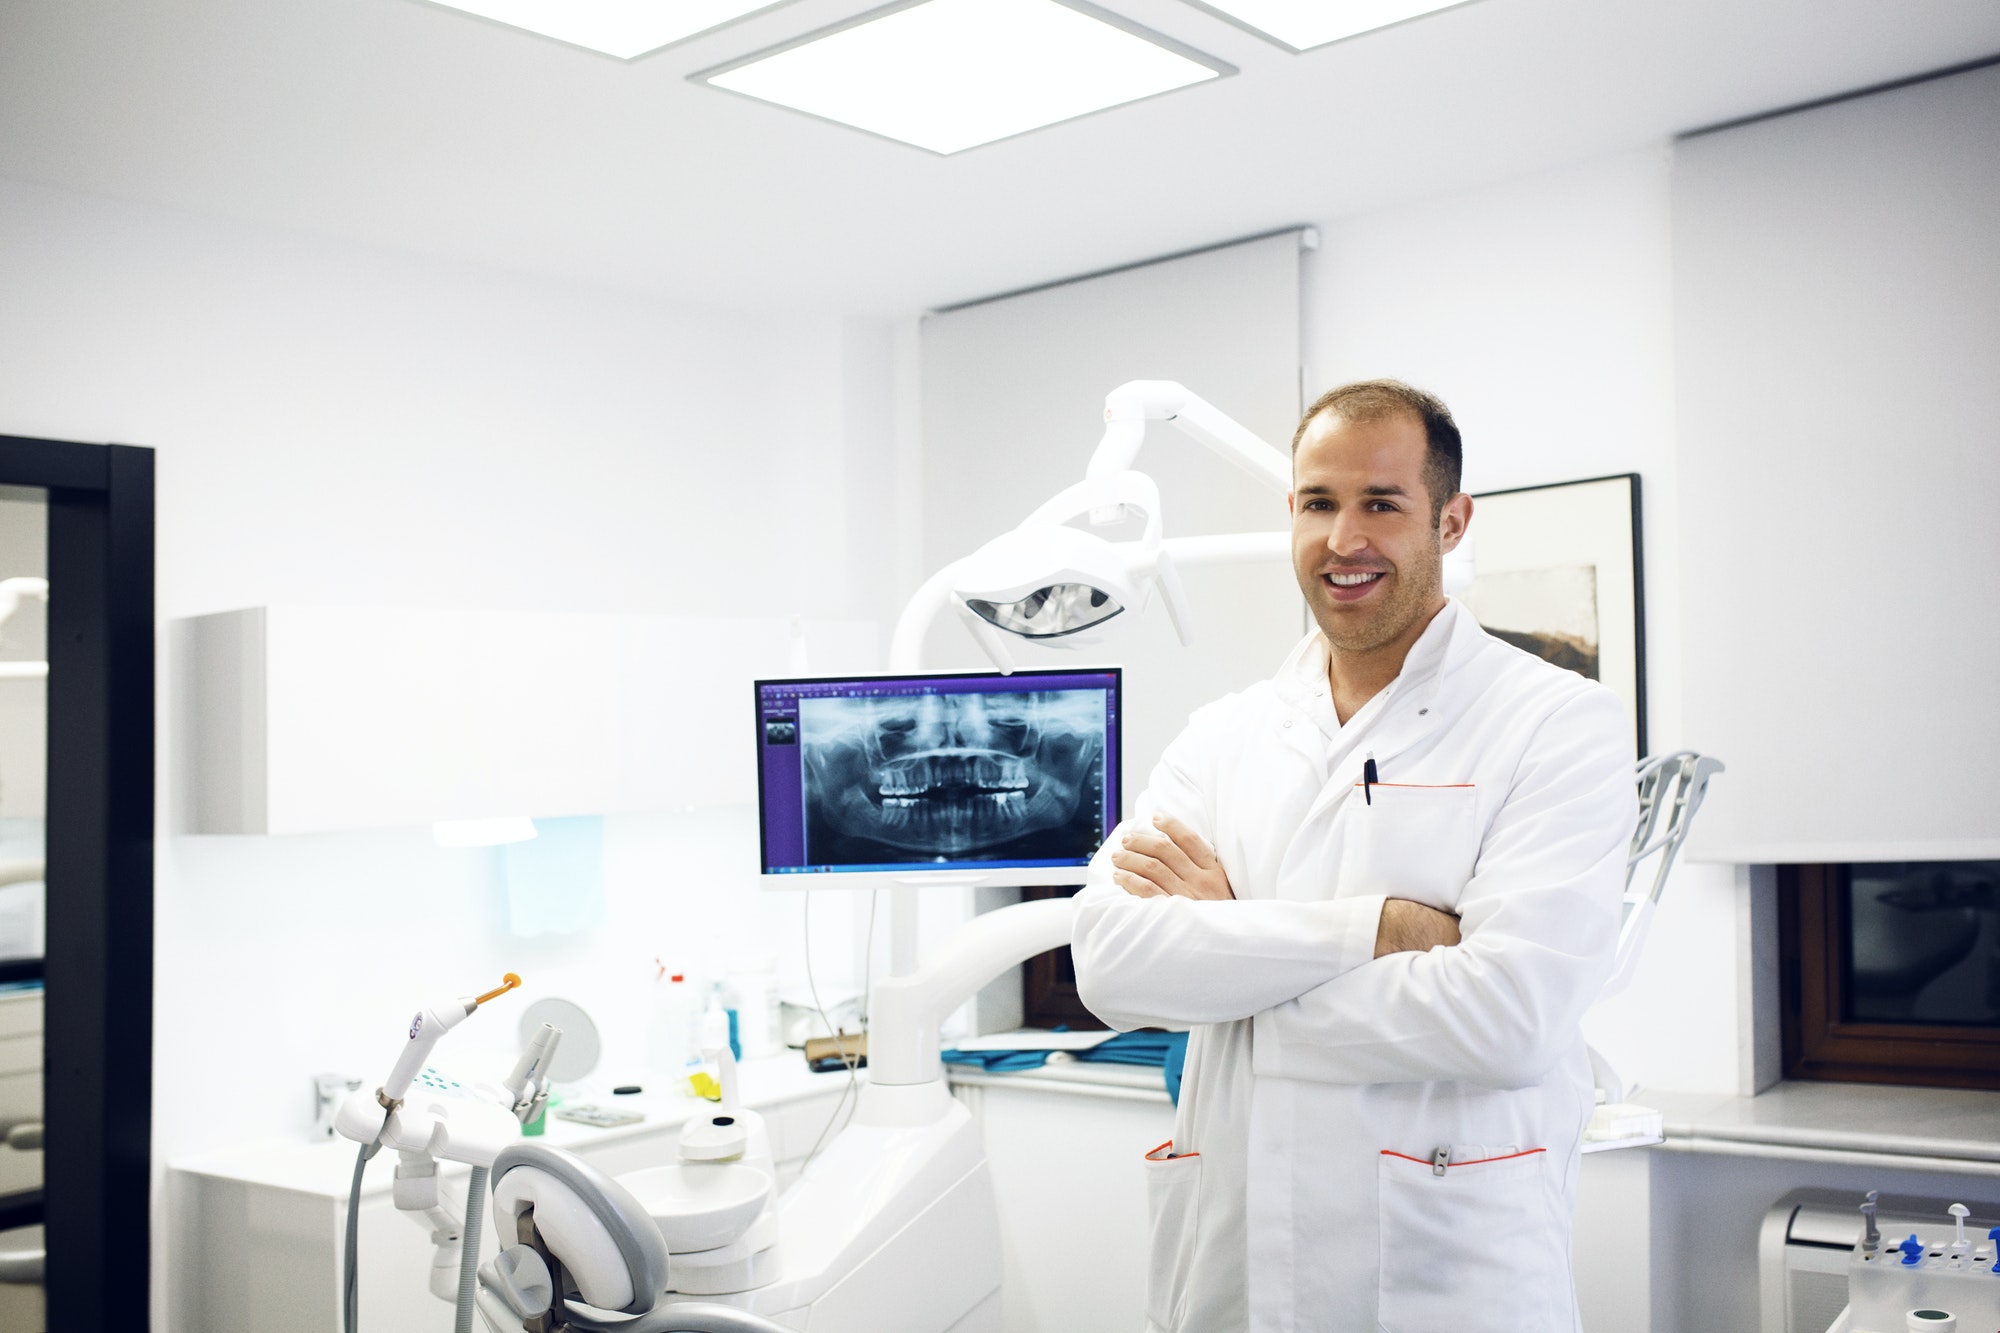 Portrait Of Confident Dentist Standing By Dental Equipment In Clinic